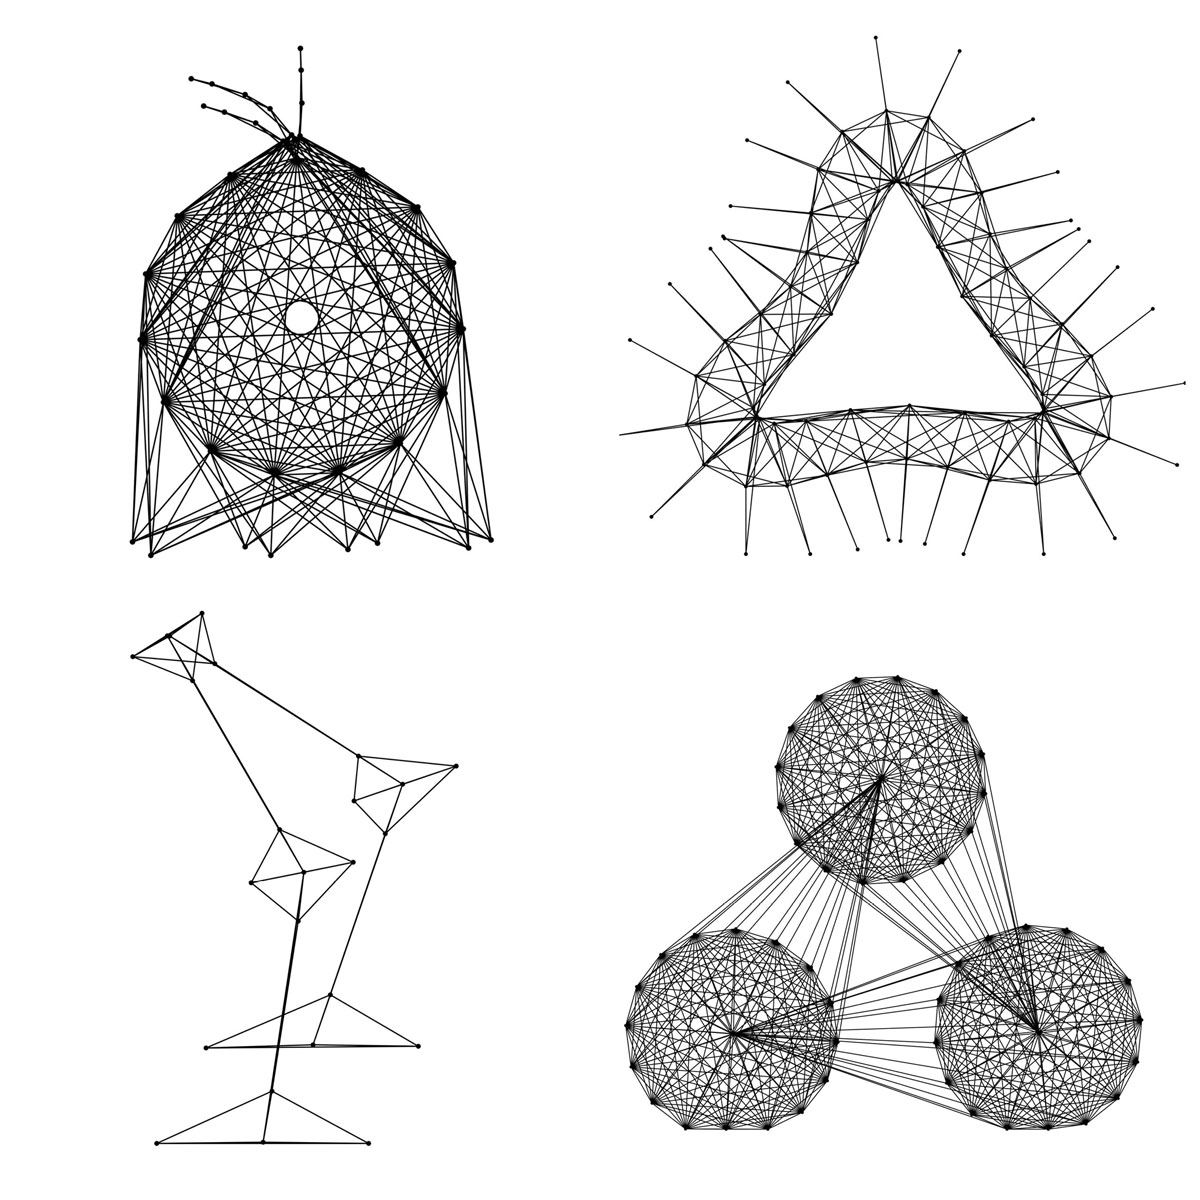 A digital illustration of four geometric models resembling living organisms, created through a program called sodaconstructor. 